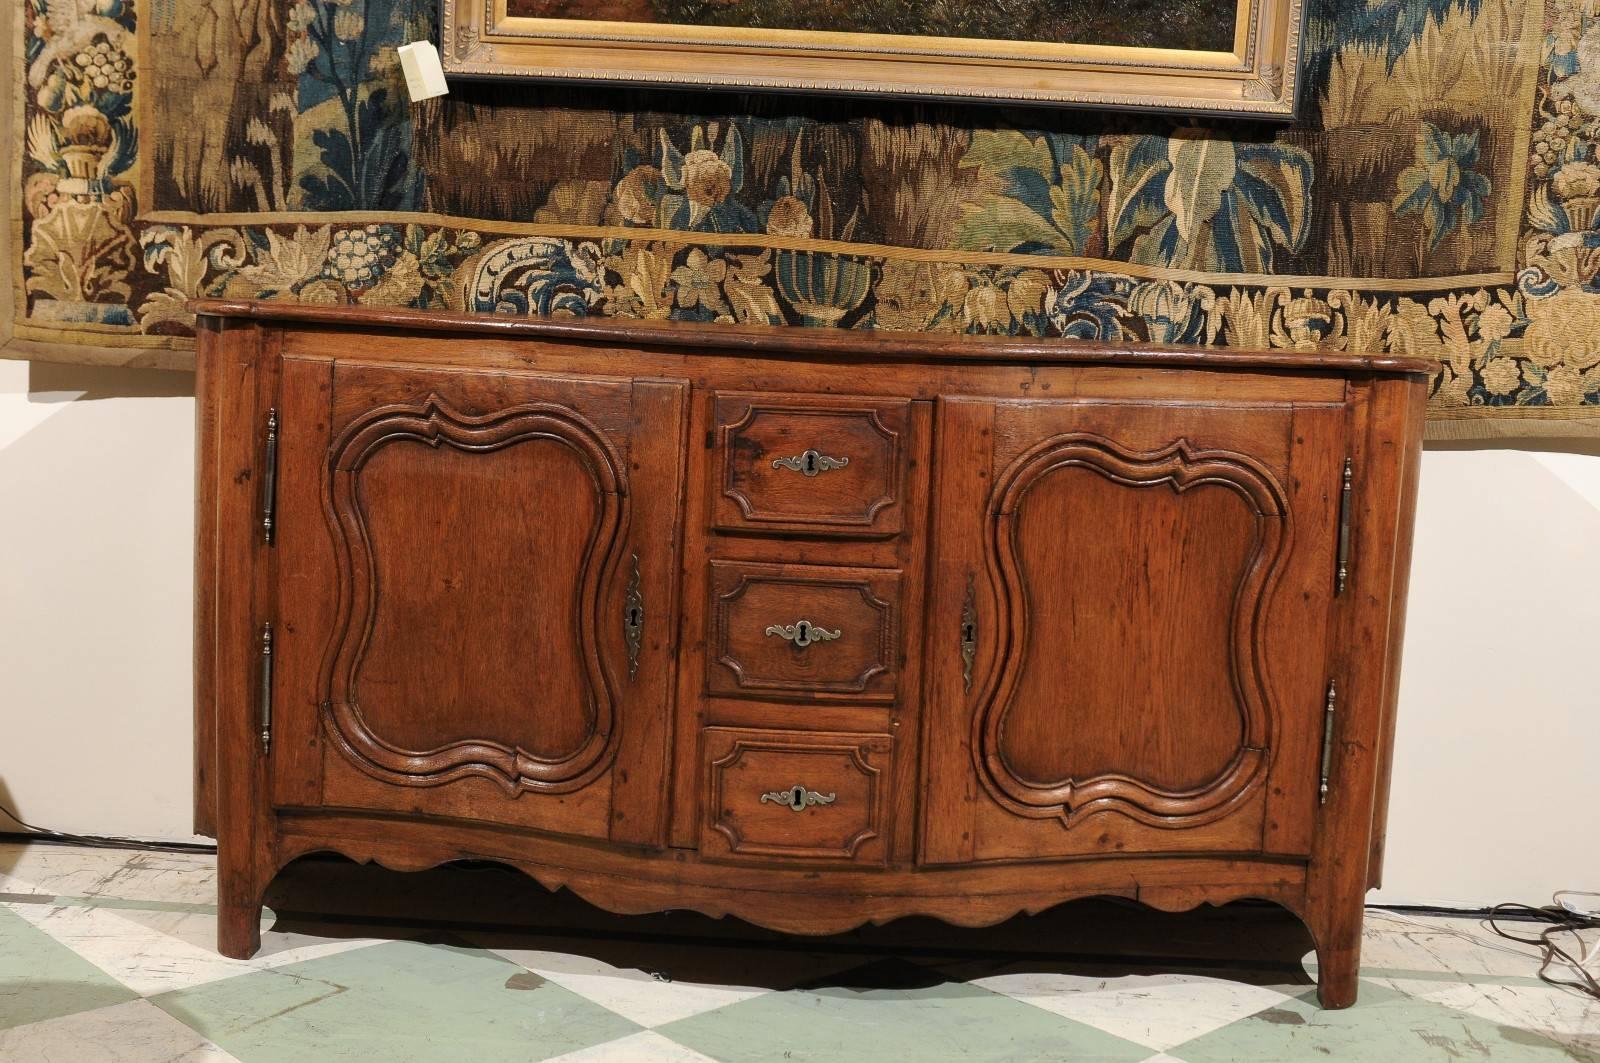 Louis XV Period Enfilade in oak with two cabinet doors flanking three central stacked drawers, shaped apron and serpentine front. France, 18th century. The wood on this piece is a faded oak with a medium brown tone.